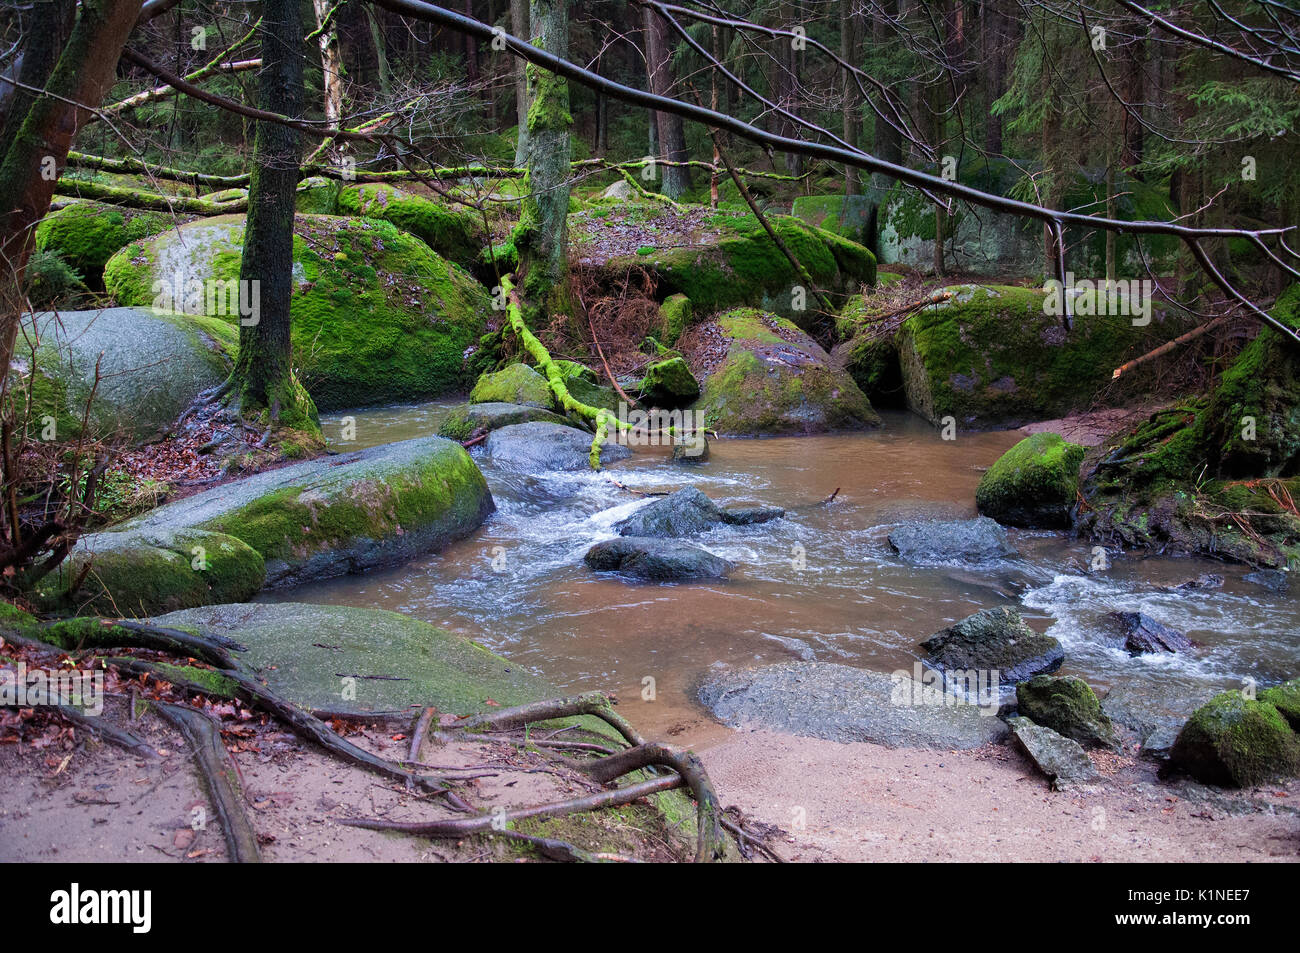 OBERPFALZ, GERMANY - Dec. 16, 2015: Nature Reserve Doost consists of round granite which collected in a brook during the Ice Age. Stock Photo